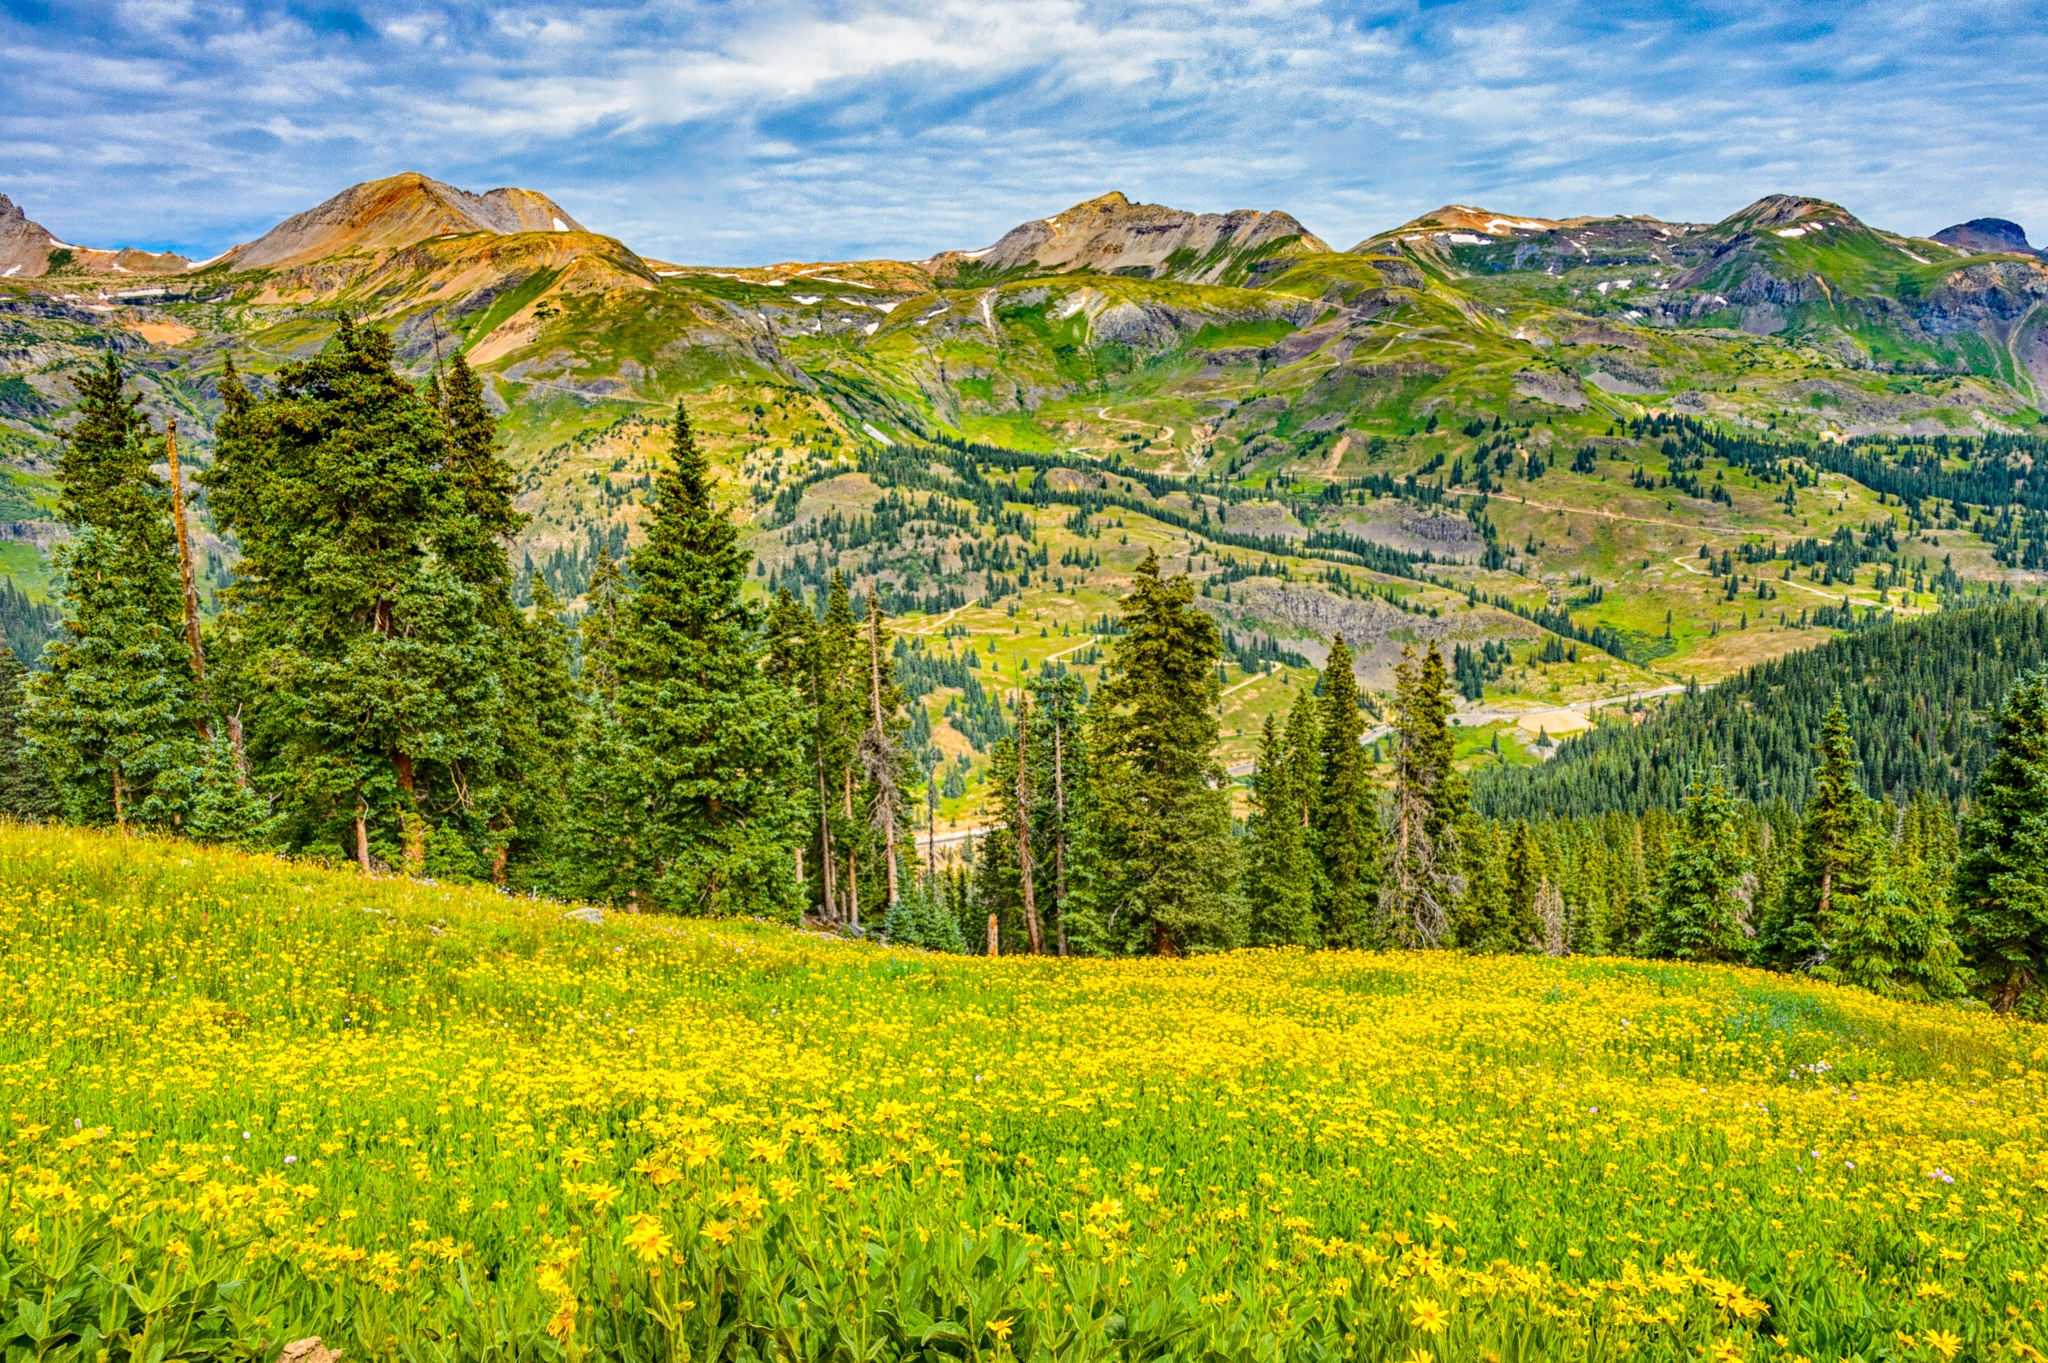 Highway 550 can be seen across a sea of Leafy Arnica along FS 825 north of Silverton, Colorado.